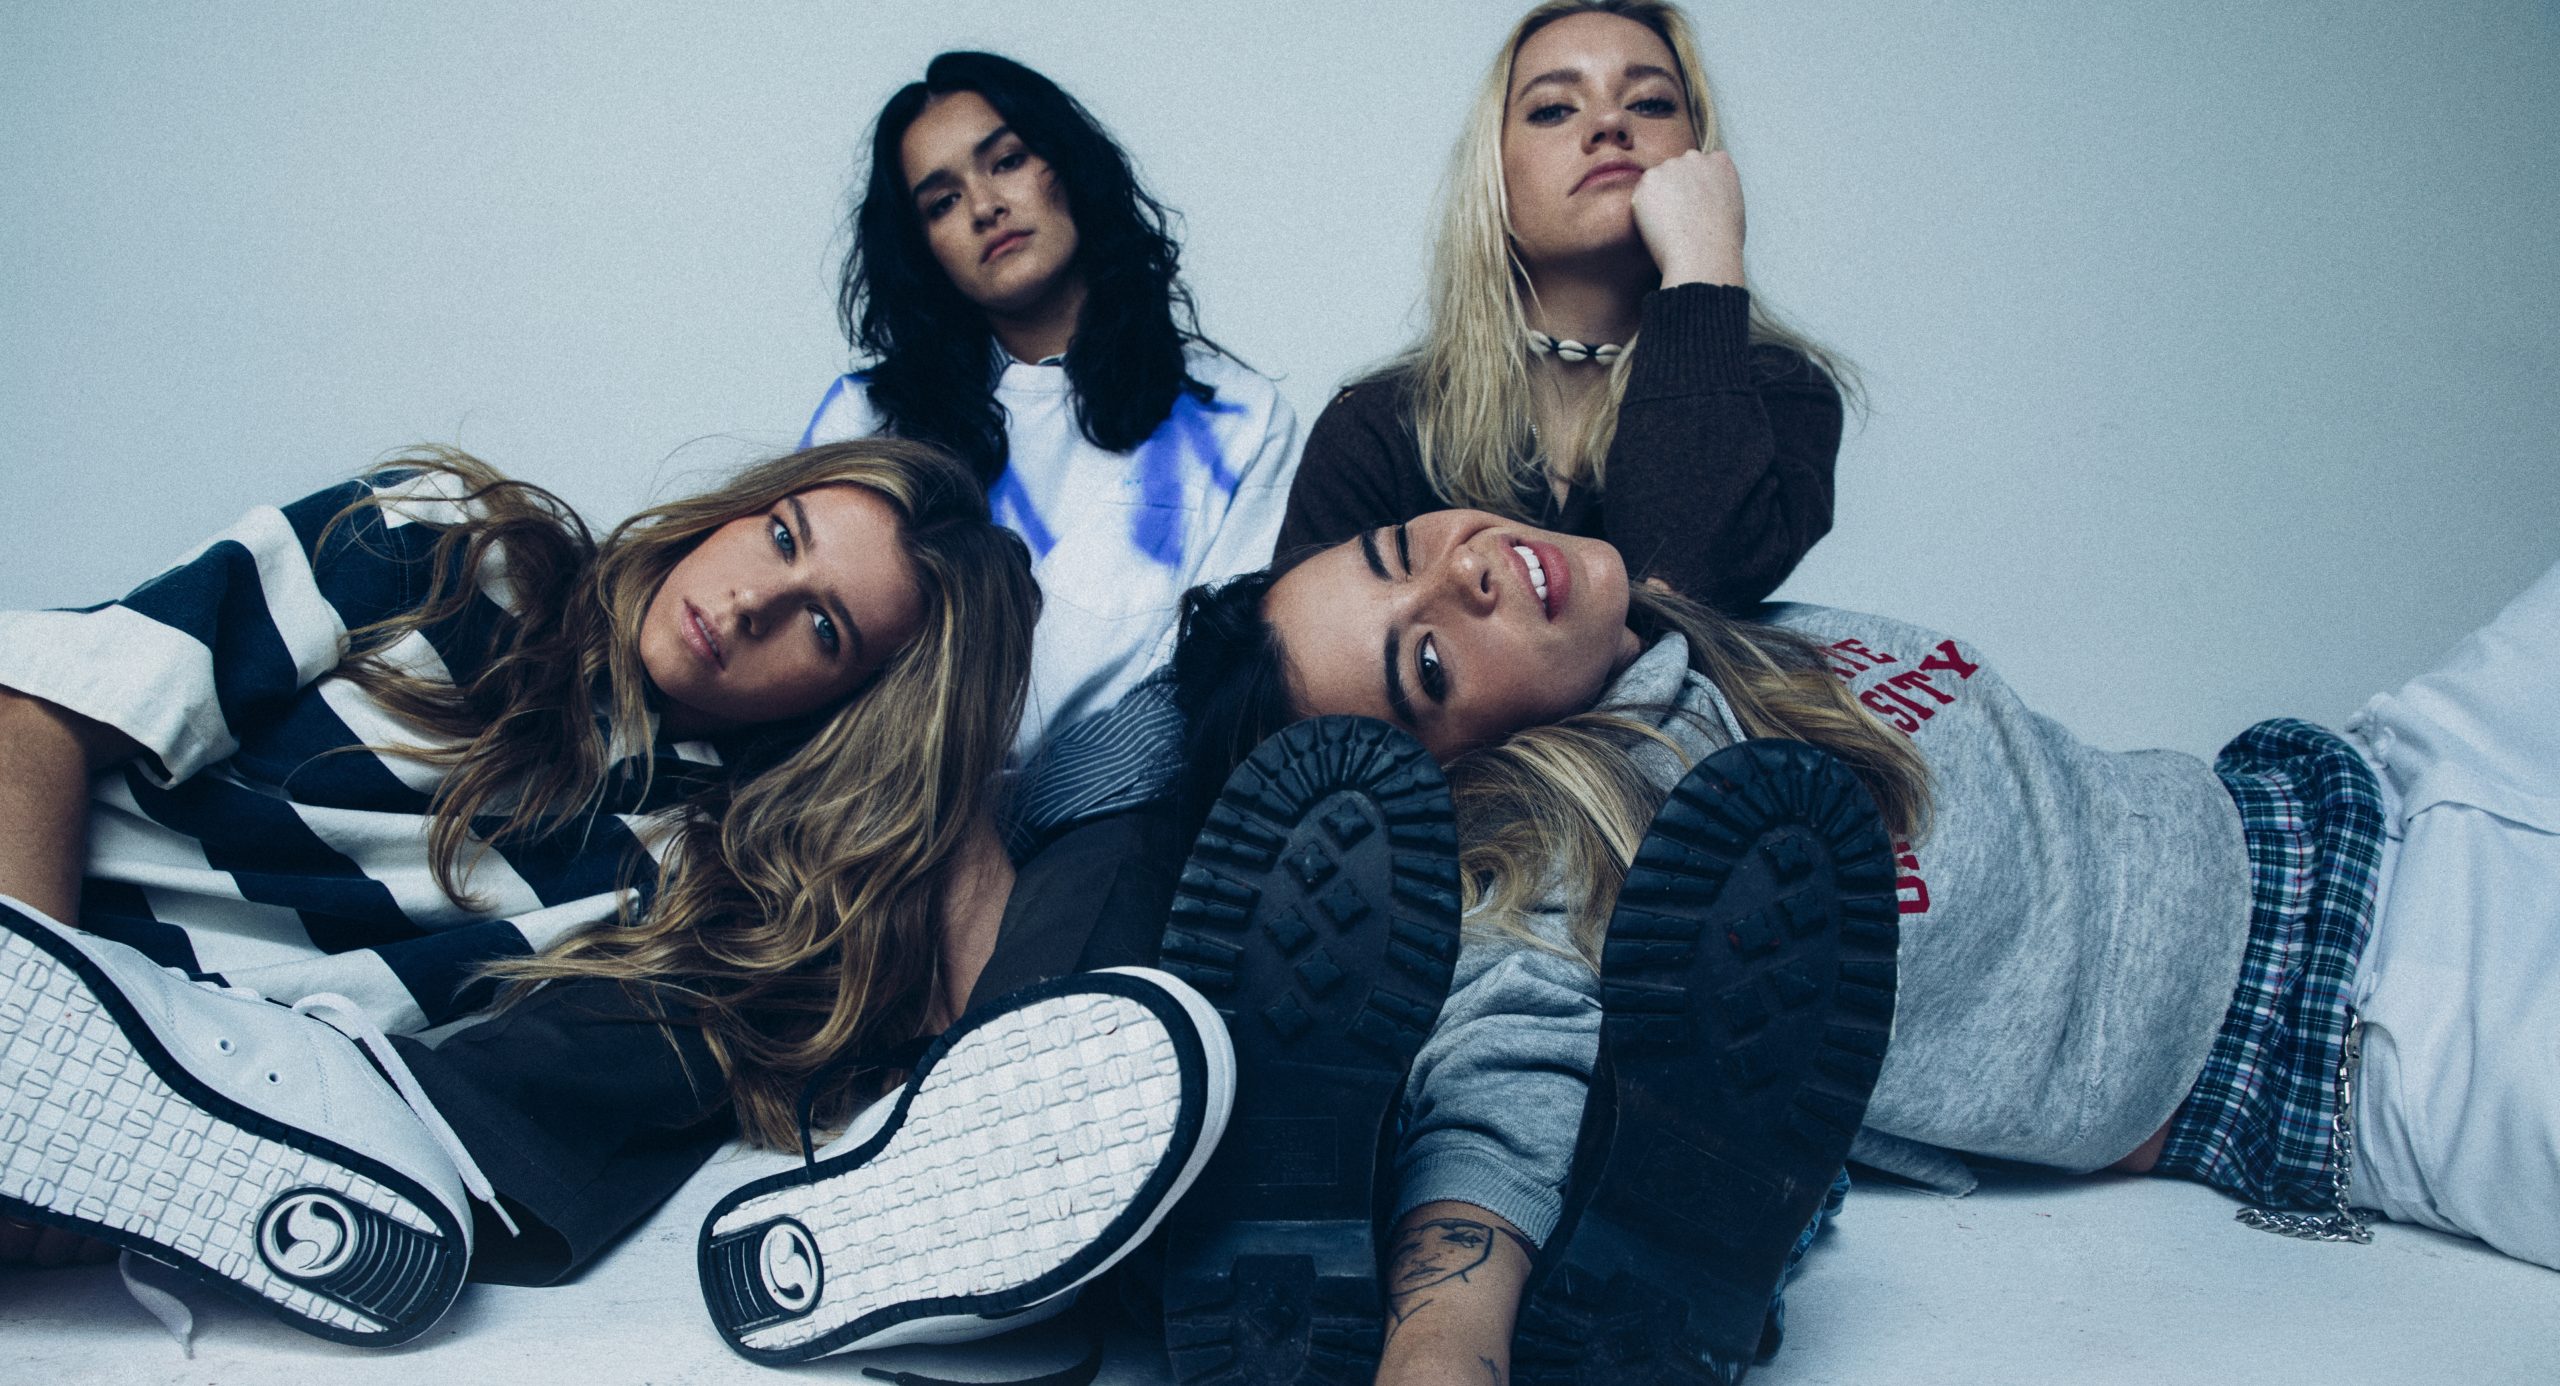 THE ACES return with new music video for single 'DAYDREAM' 